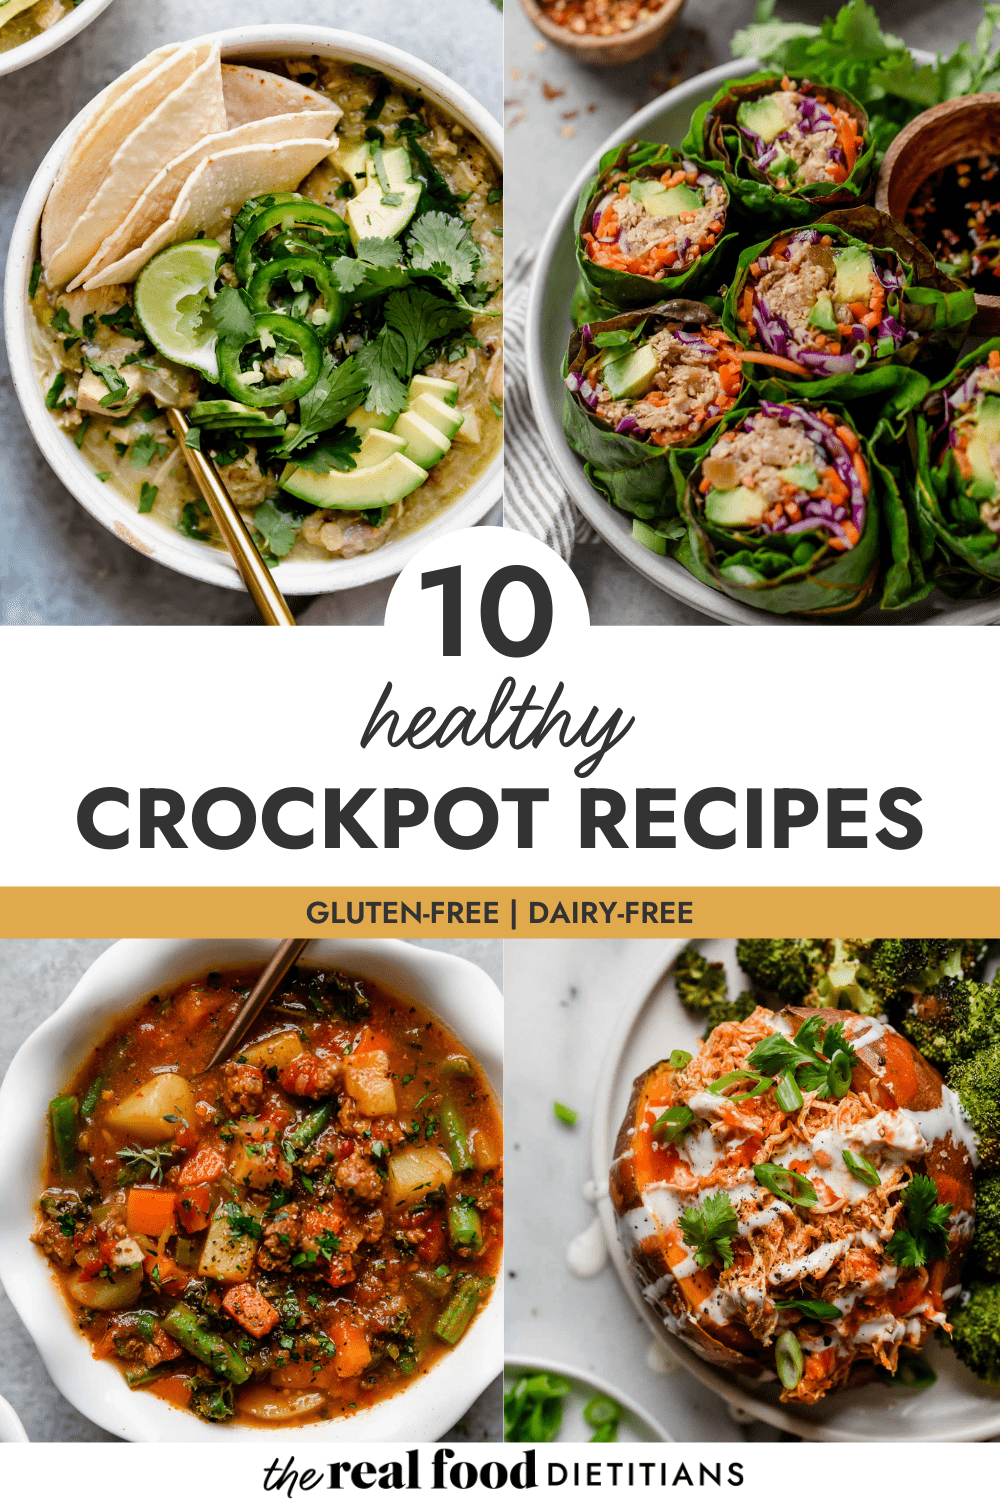 10 Healthy Crockpot Recipes - The Real Food Dietitians